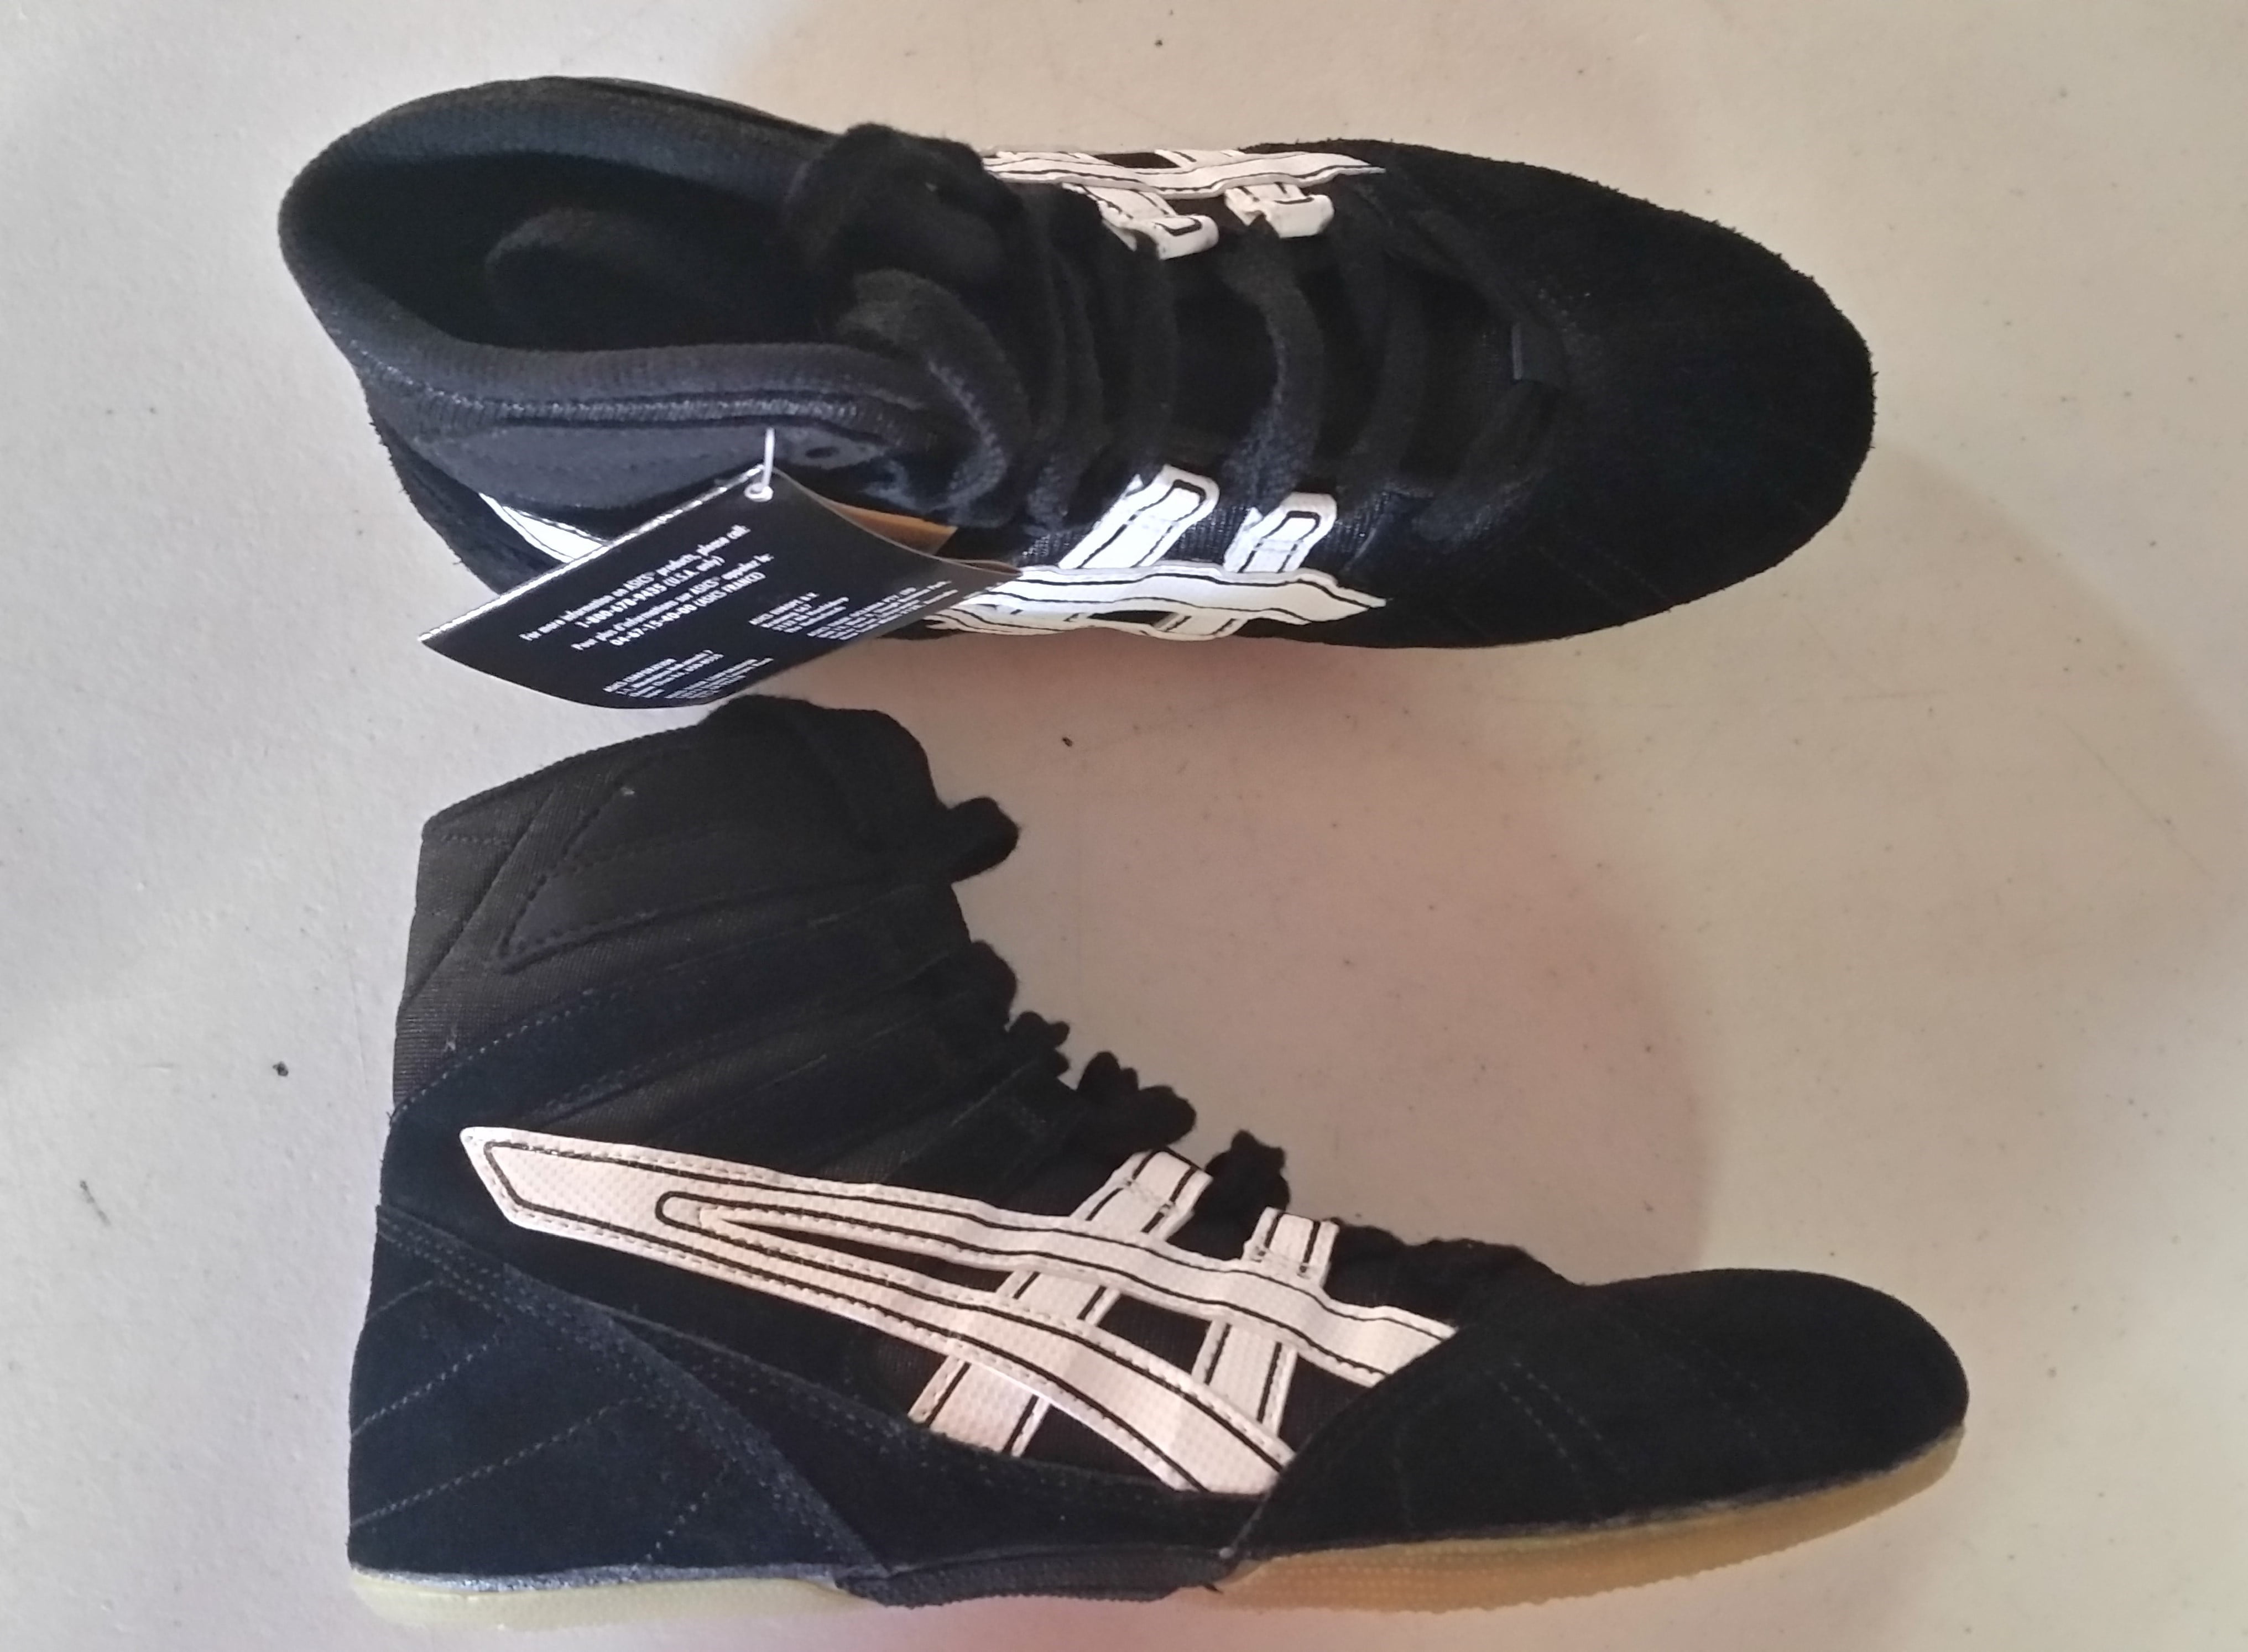 youth size 6 wrestling shoes